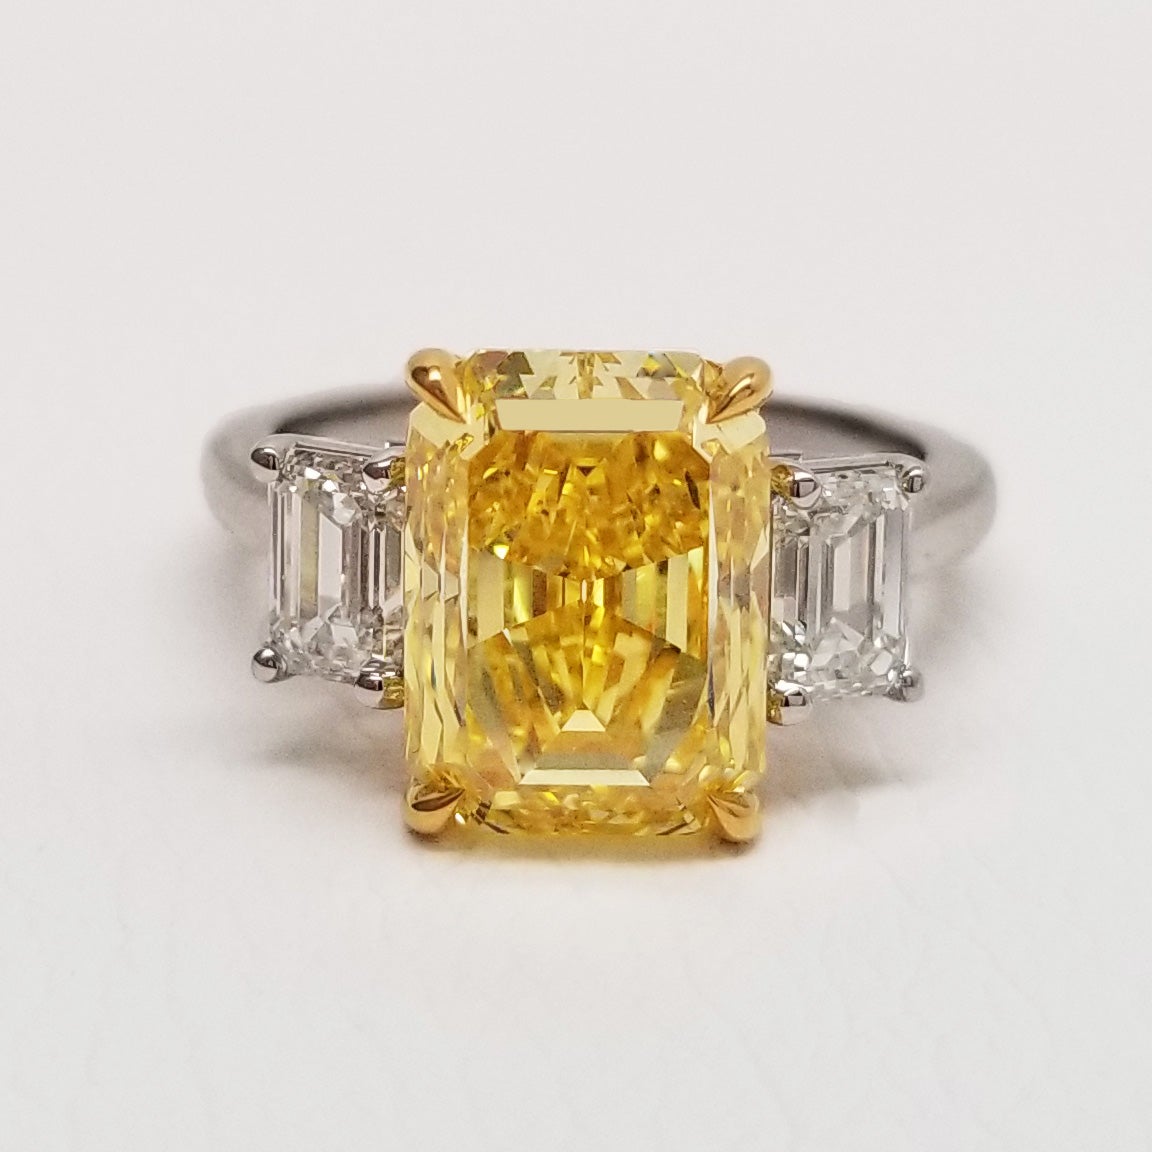 5.18 ct Emerald Cut Fancy Vivid Yellow Diamond 3 Stone Engagement Ring GIA 18k  For Sale